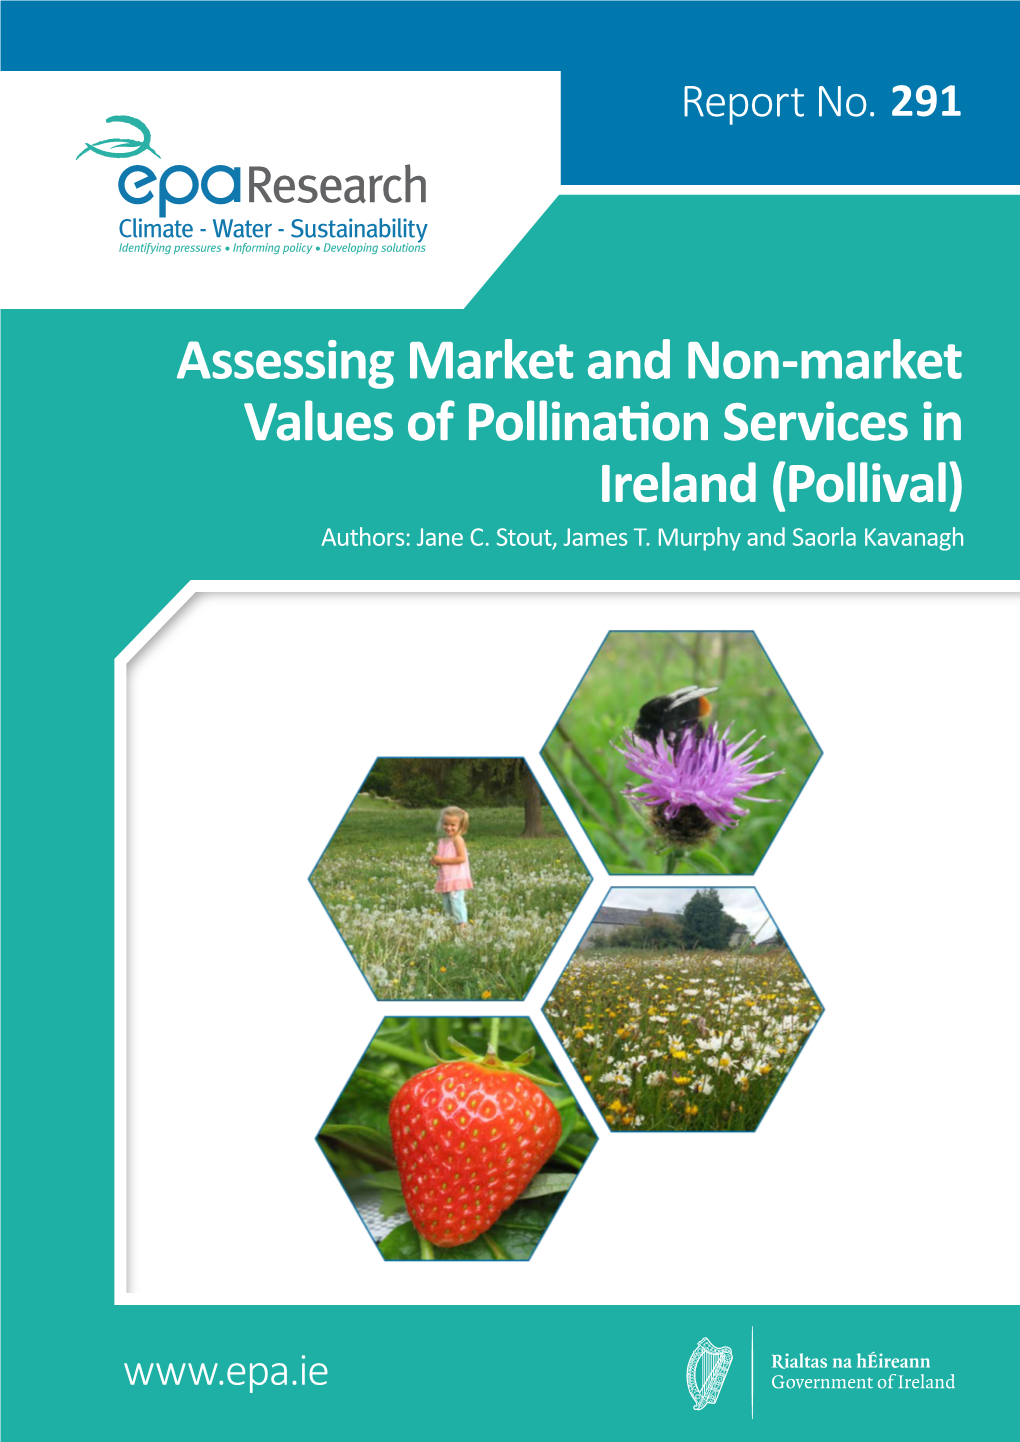 Assessing Market and Non-Market Values of Pollination Services in Ireland (Pollival) Authors: Jane C